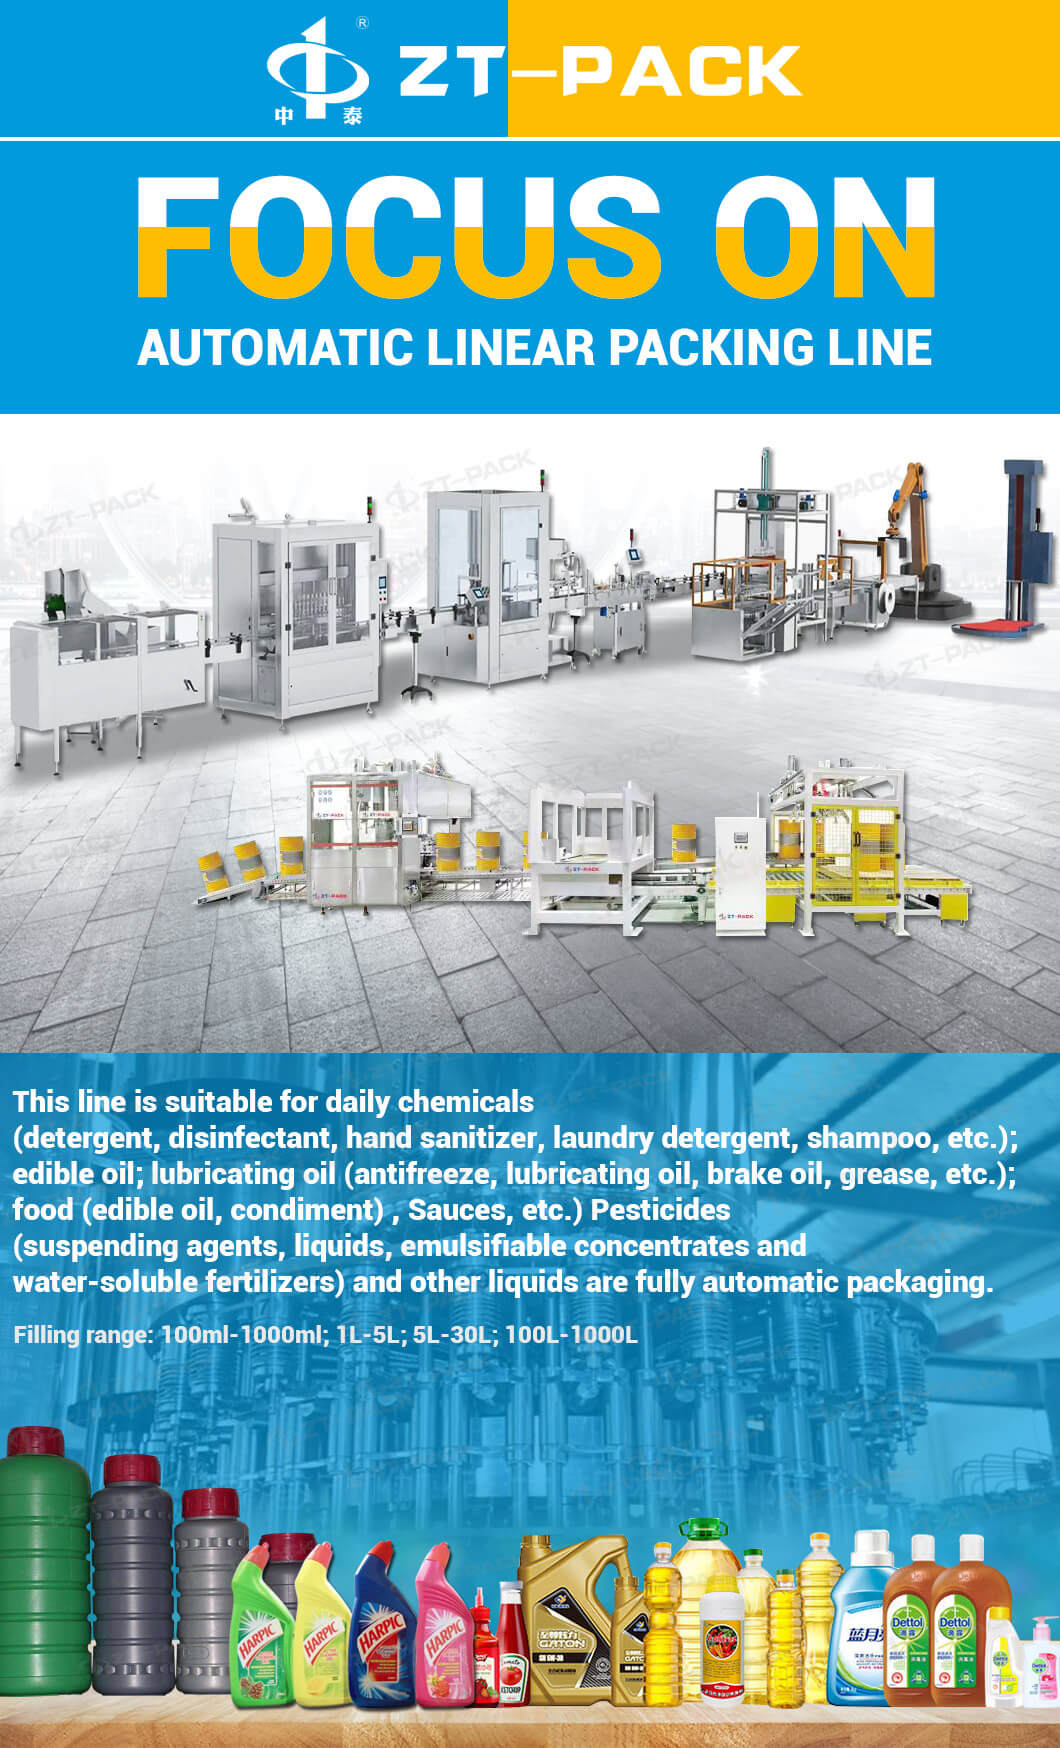 ZT-PACK Complete Packaging Line